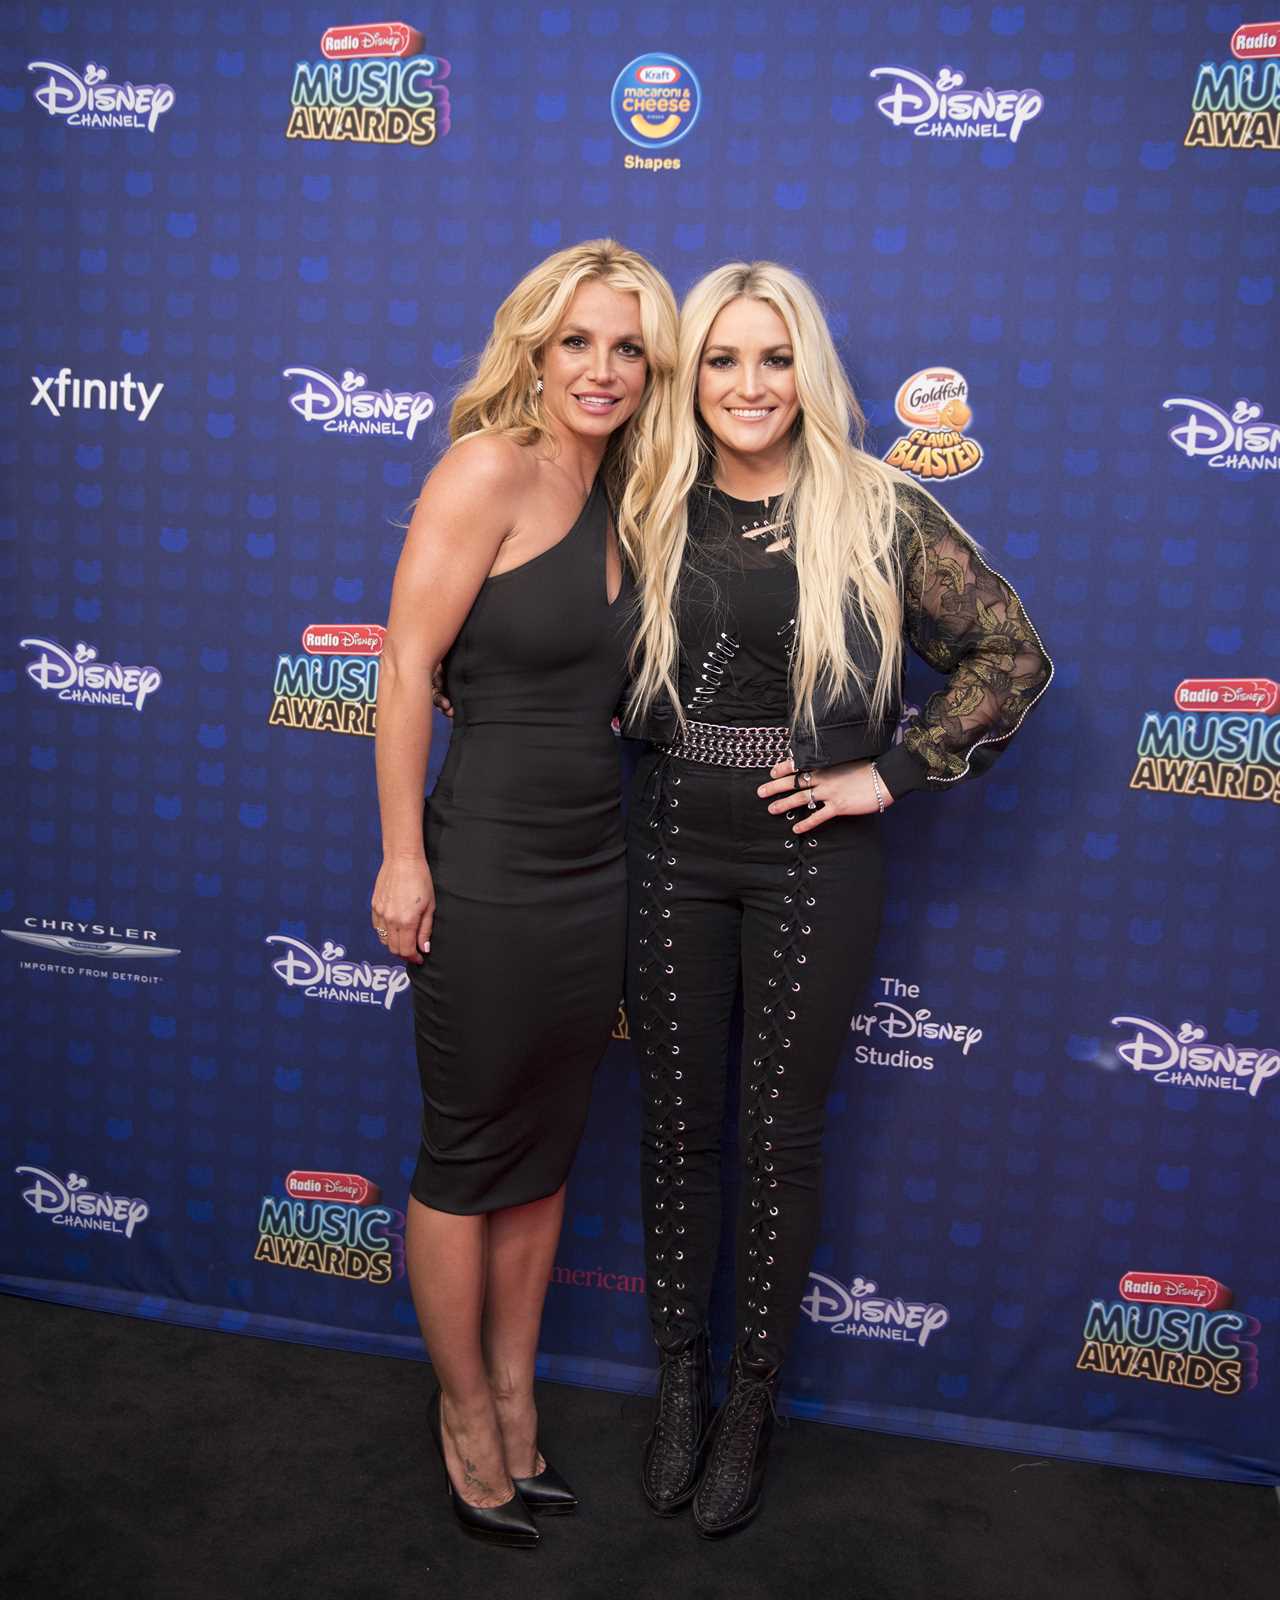 Jamie Lynn Spears Refuses to Acknowledge Famous Sister in Awkward I'm A Celebrity Encounter